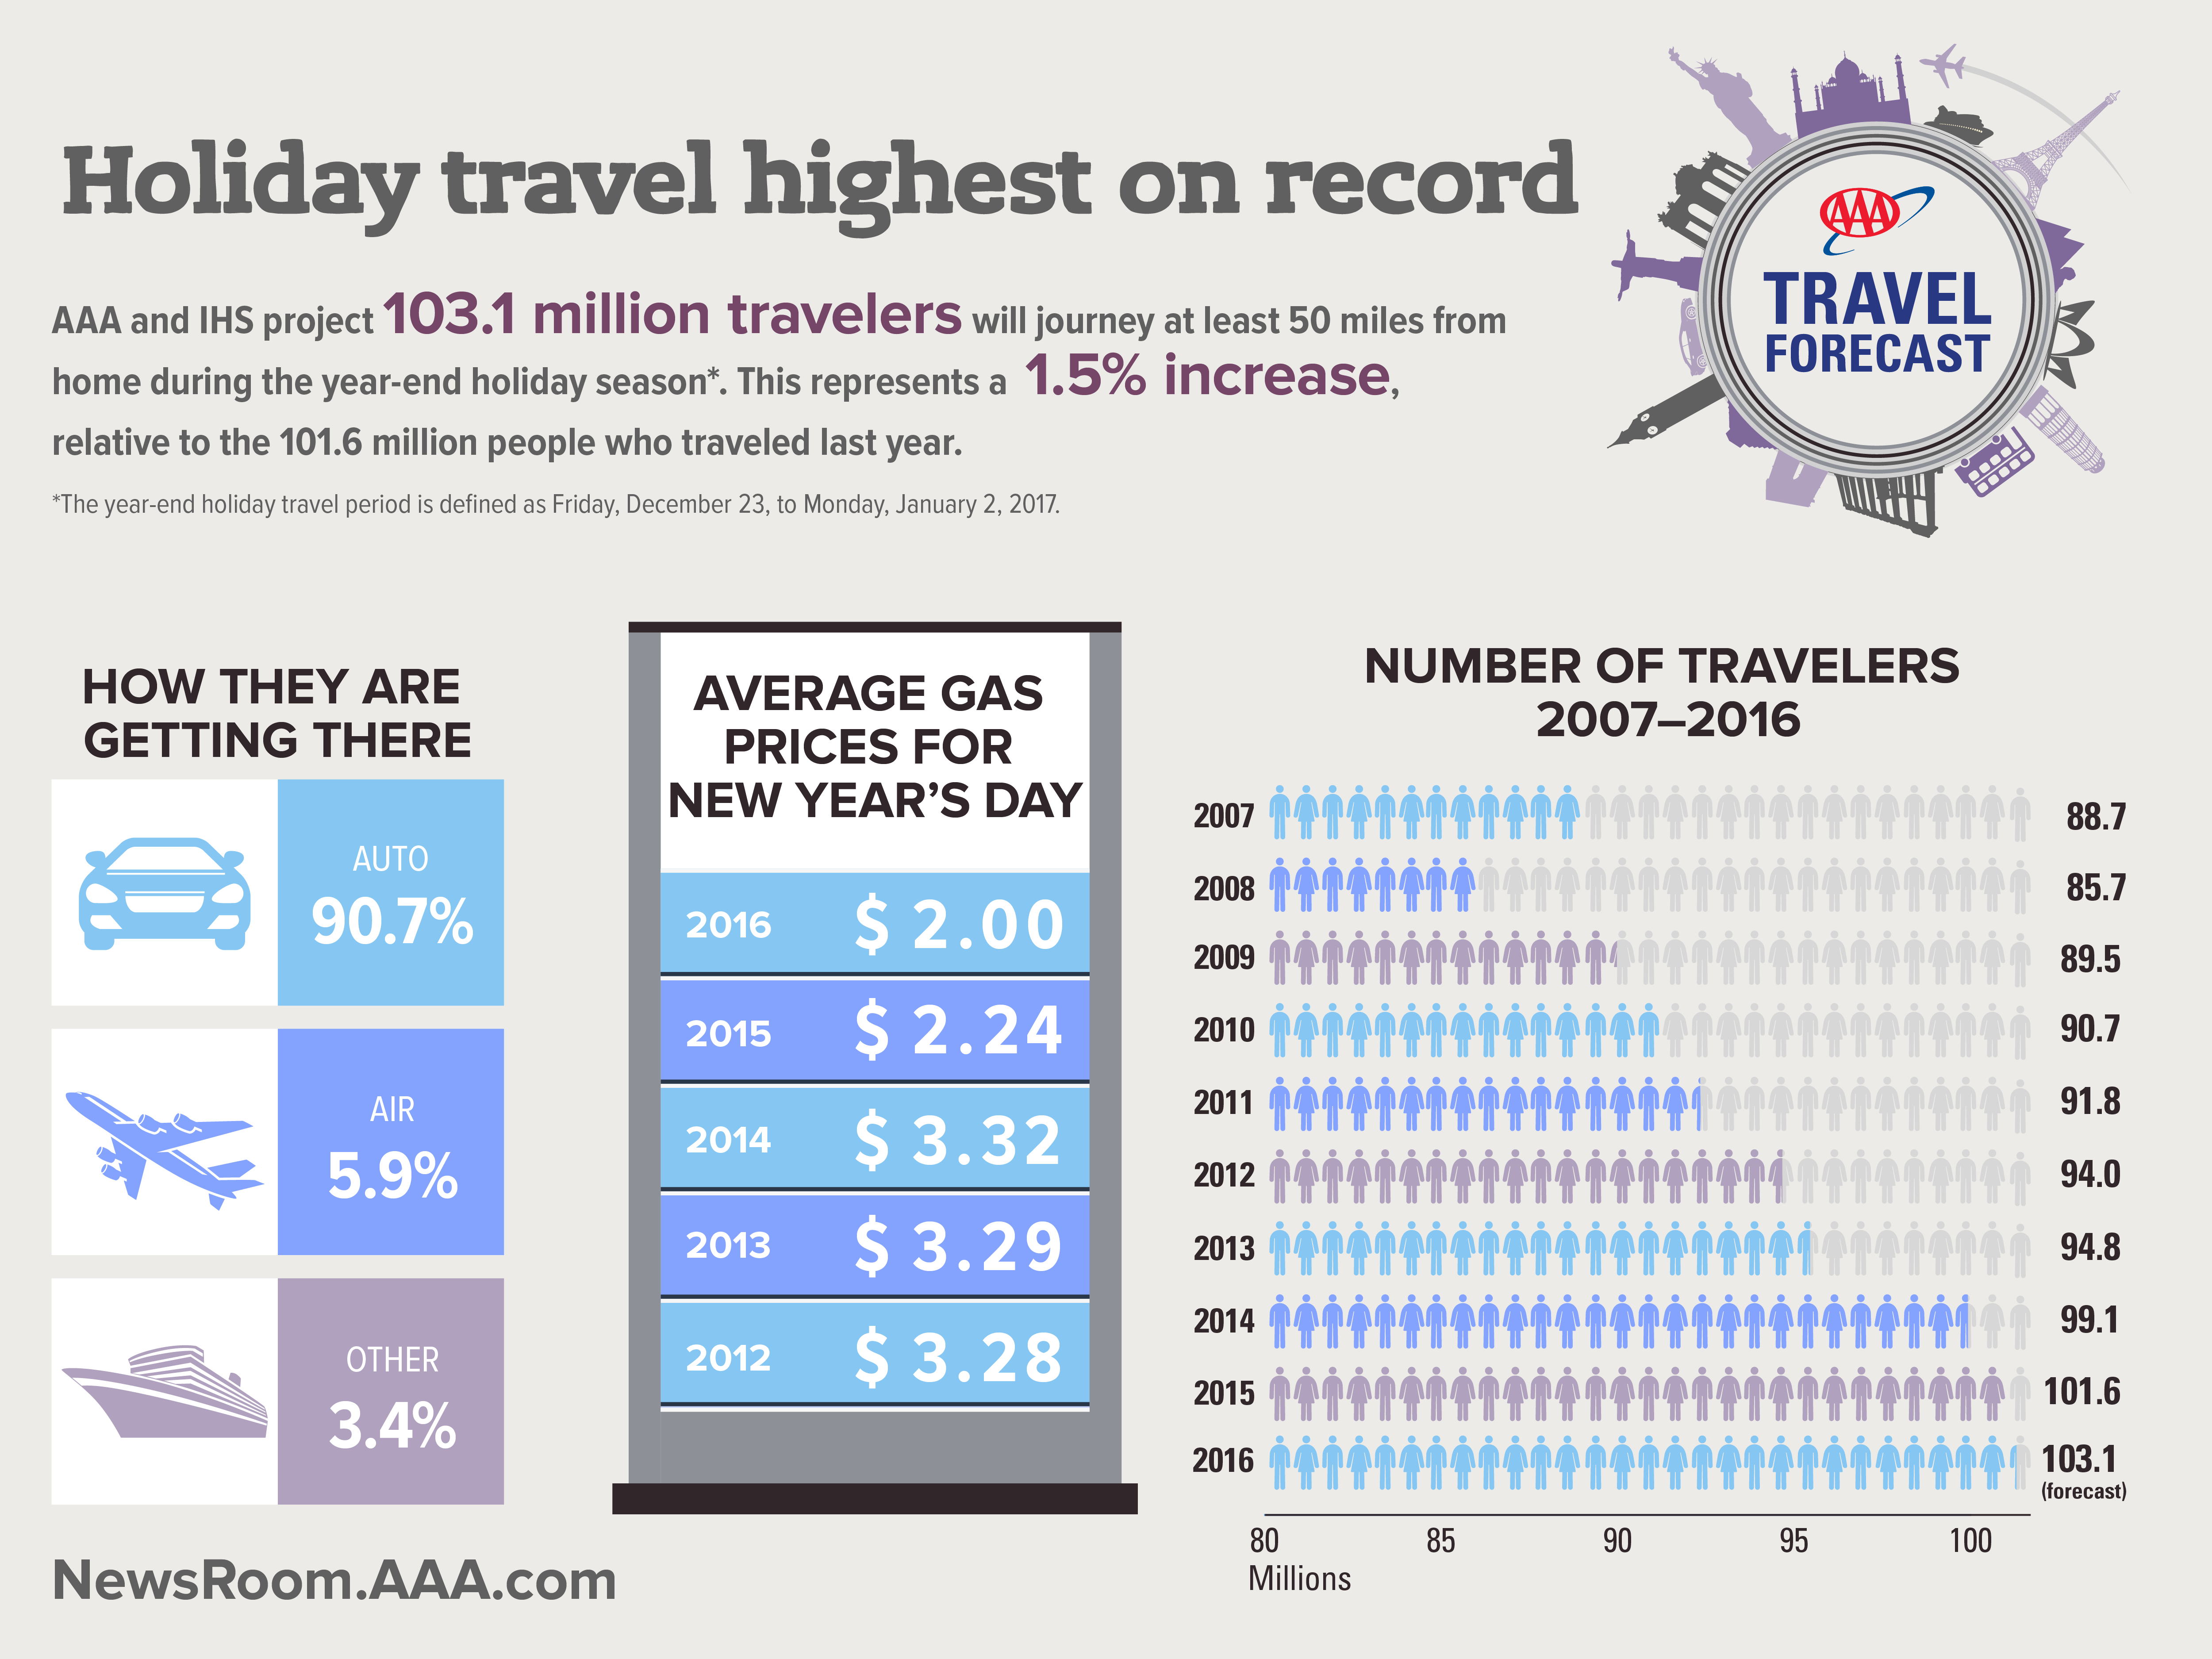 Infographic source: AAA (http://newsroom.aaa.com/tag/holiday-travel-forecast/)